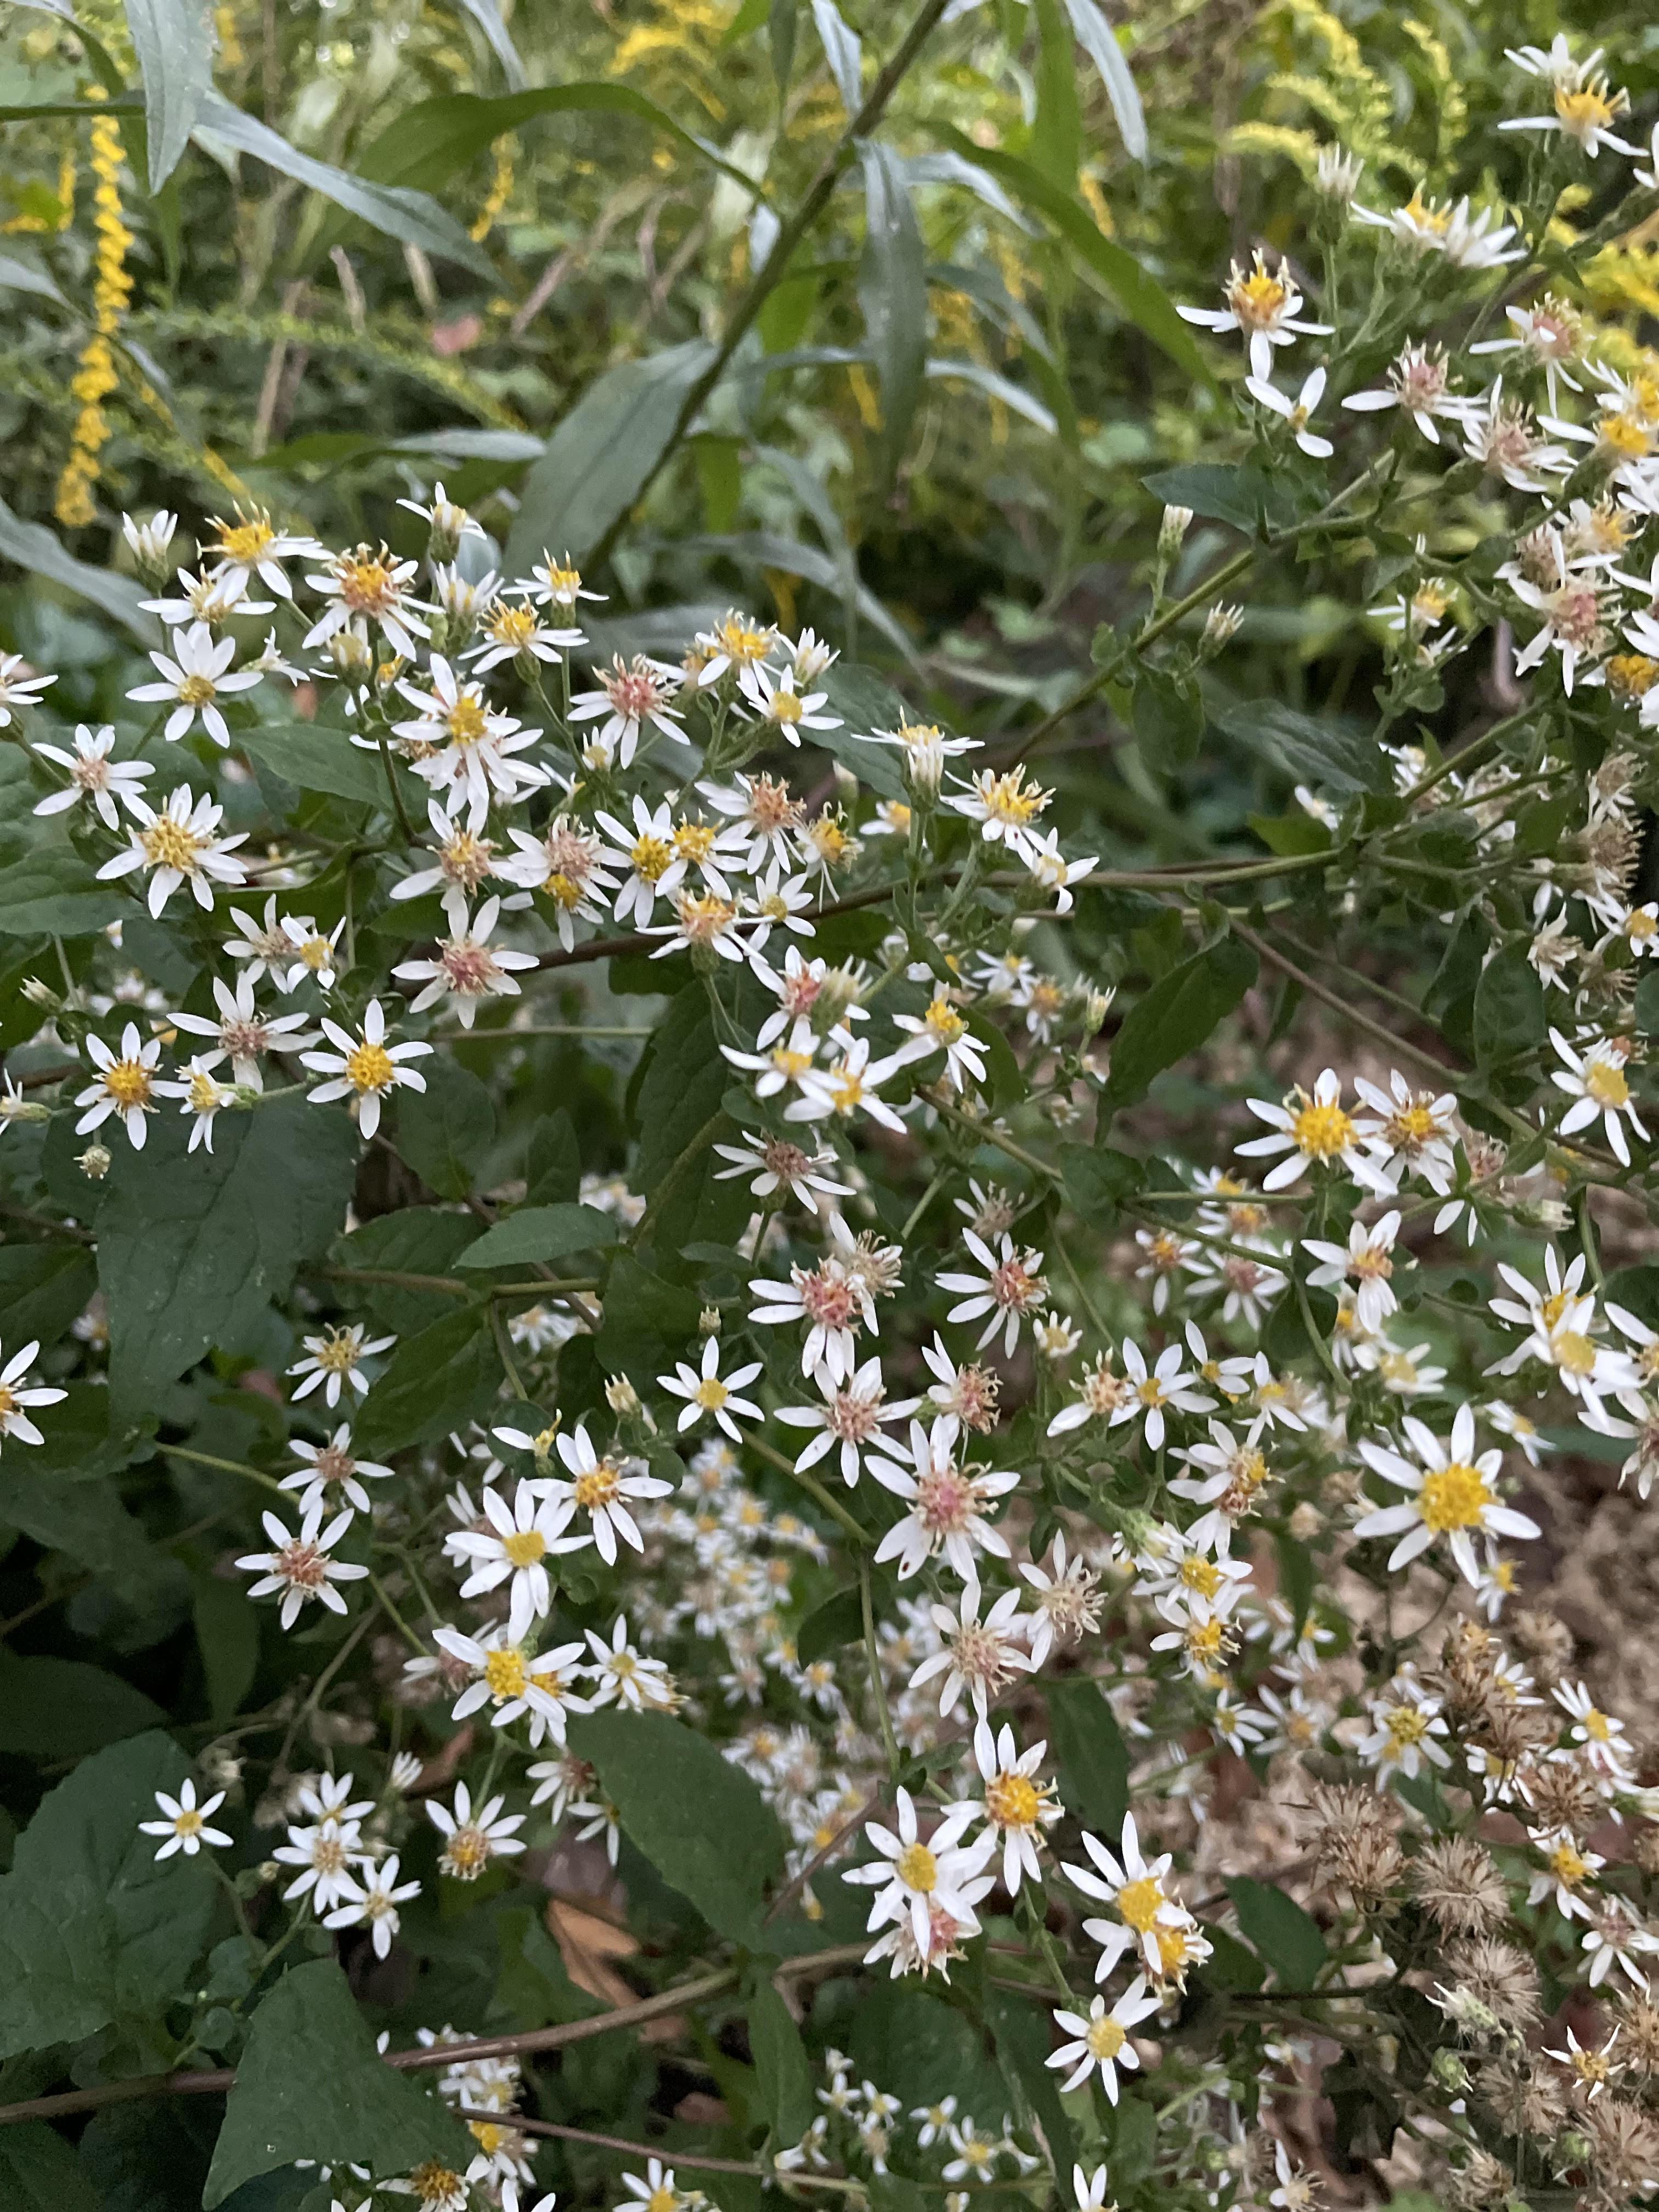 small white flowers of aster plant in bloom - native white wood aster